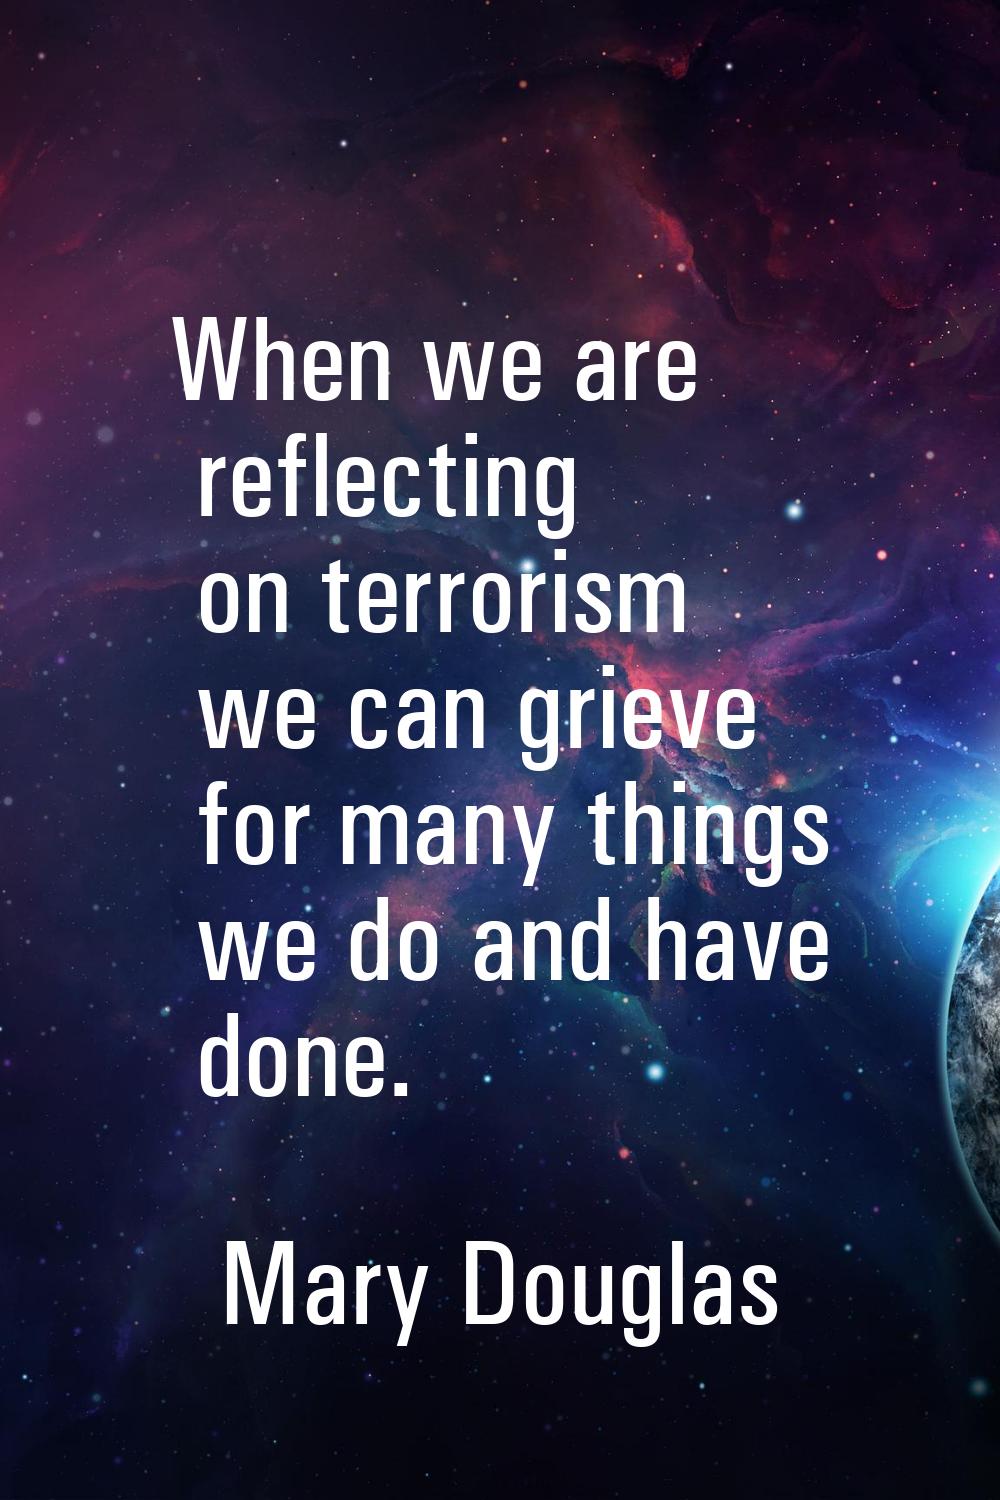 When we are reflecting on terrorism we can grieve for many things we do and have done.